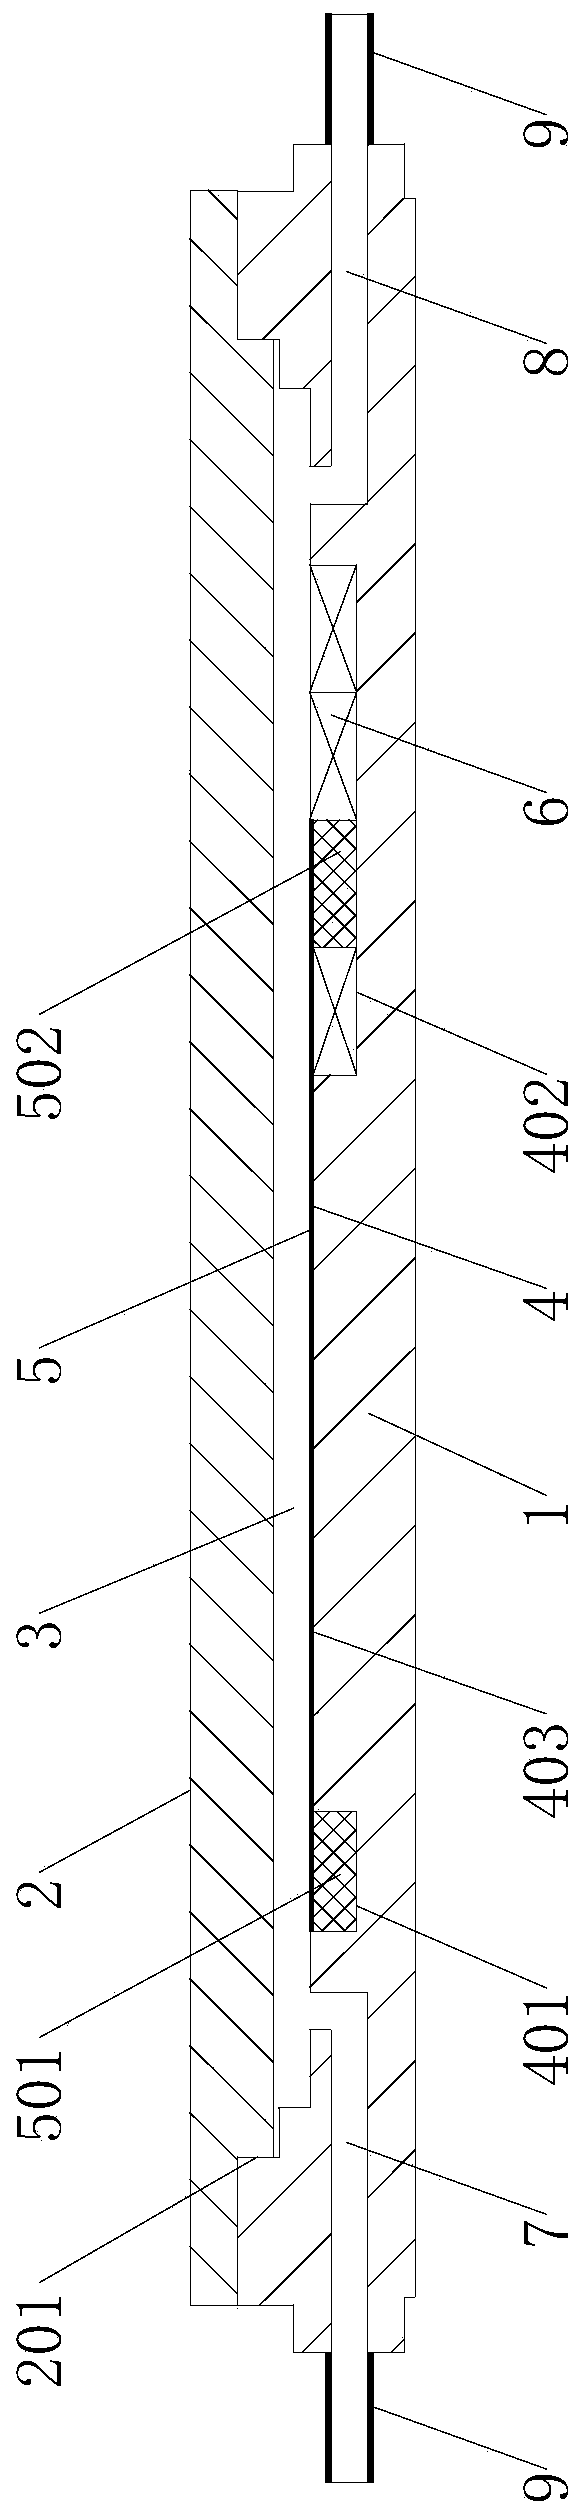 Flat plate flow cavity capable of simultaneously applying static pulling force and flow shearing force